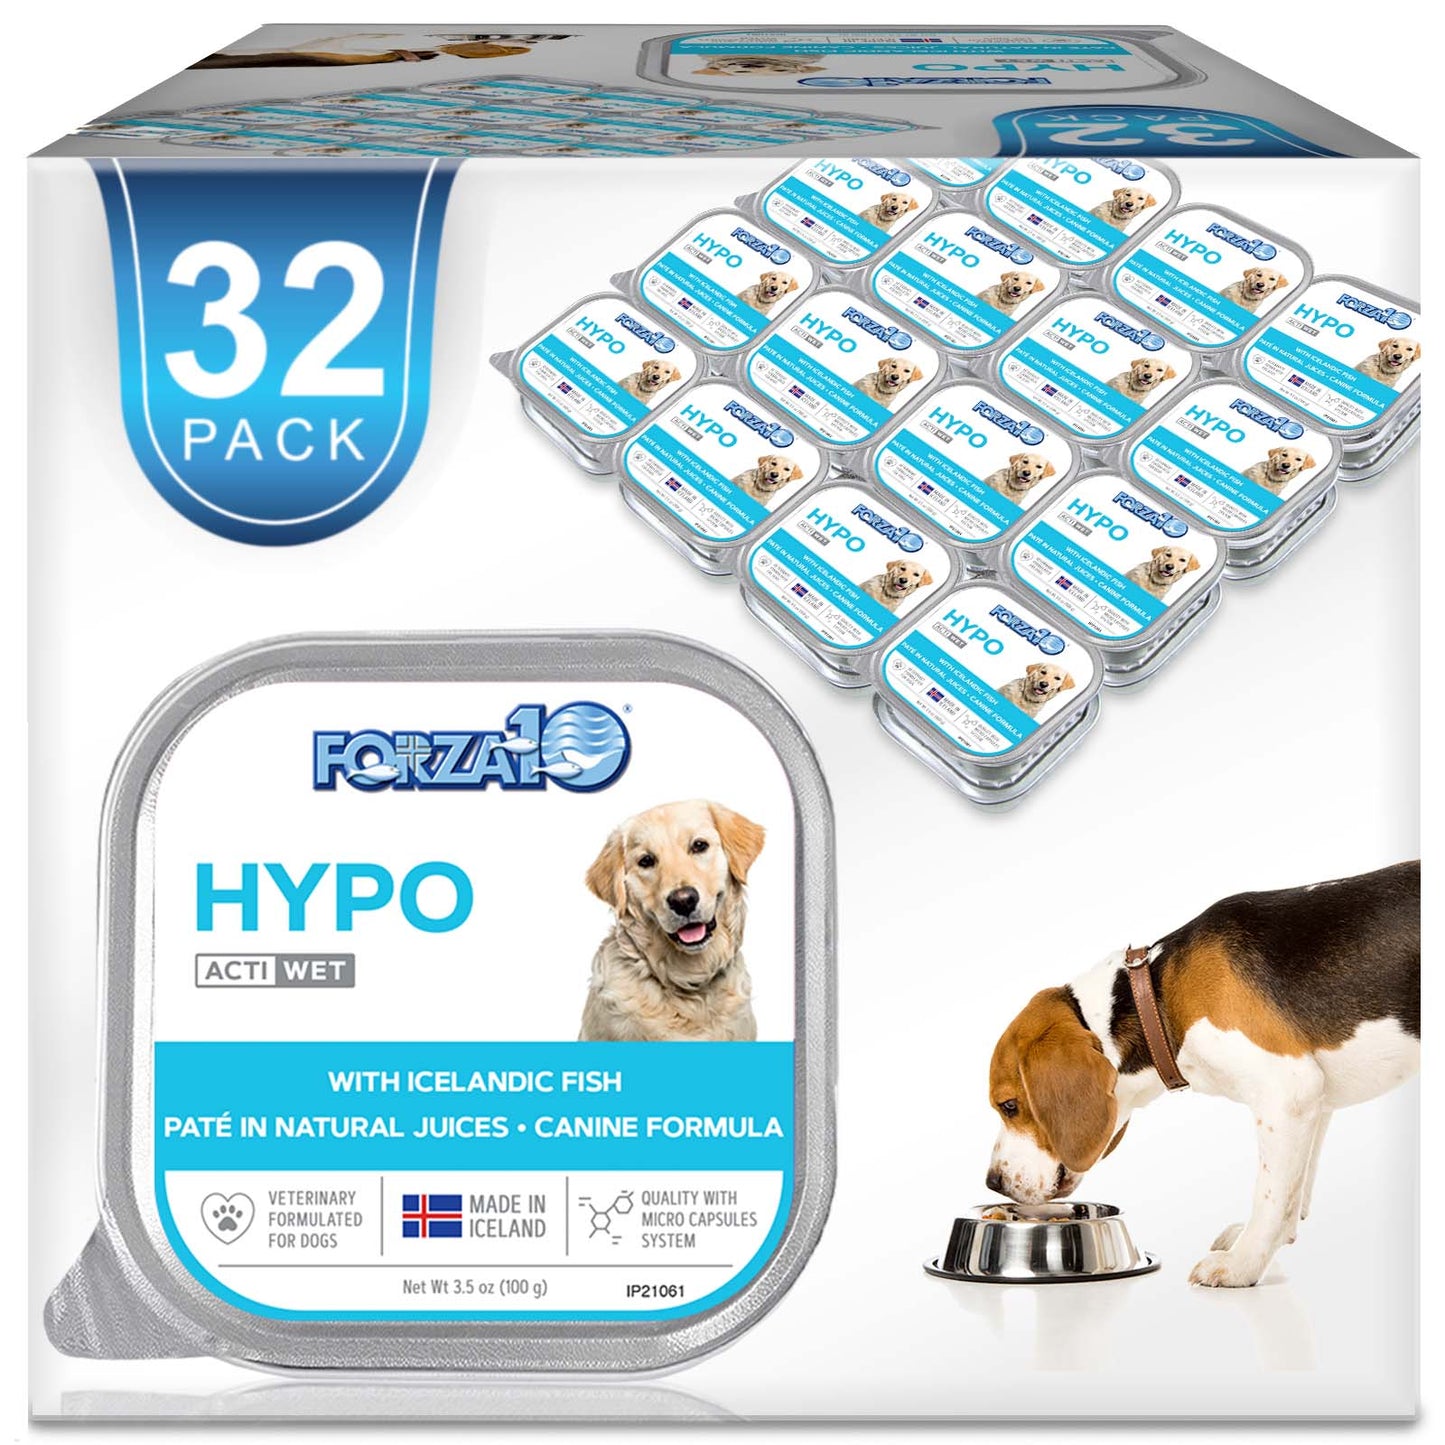 FORZA10 NUTRACEUTIC ACTIWET HYPO ICELANDIC FISH RECIPE CANNED DOG FOOD